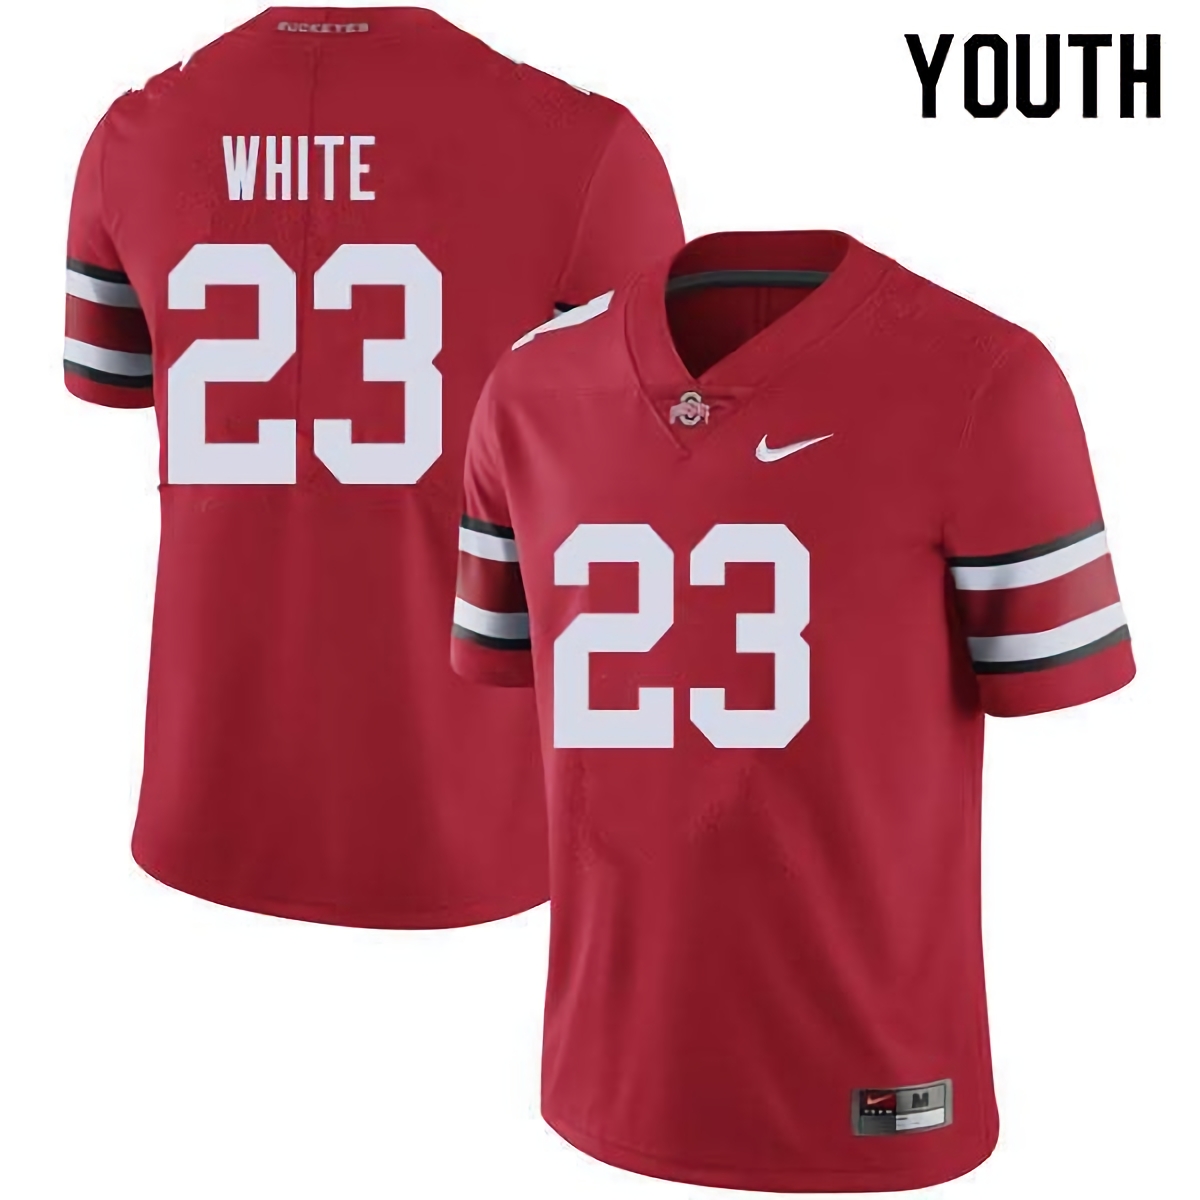 De'Shawn White Ohio State Buckeyes Youth NCAA #23 Nike Red College Stitched Football Jersey YMO0556JK